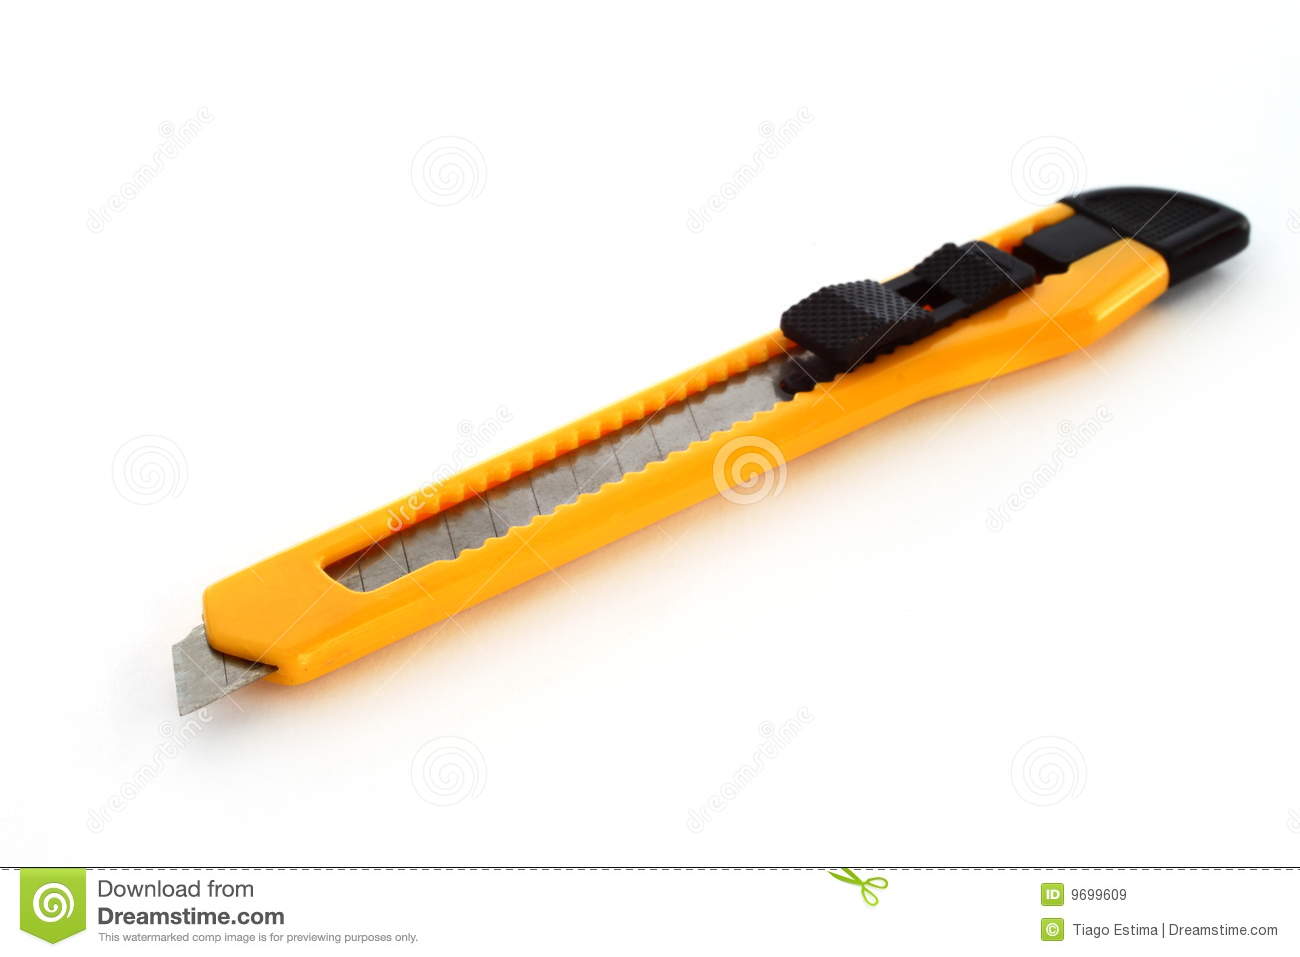 Royalty Free Stock Images  Retractable Utility Knife